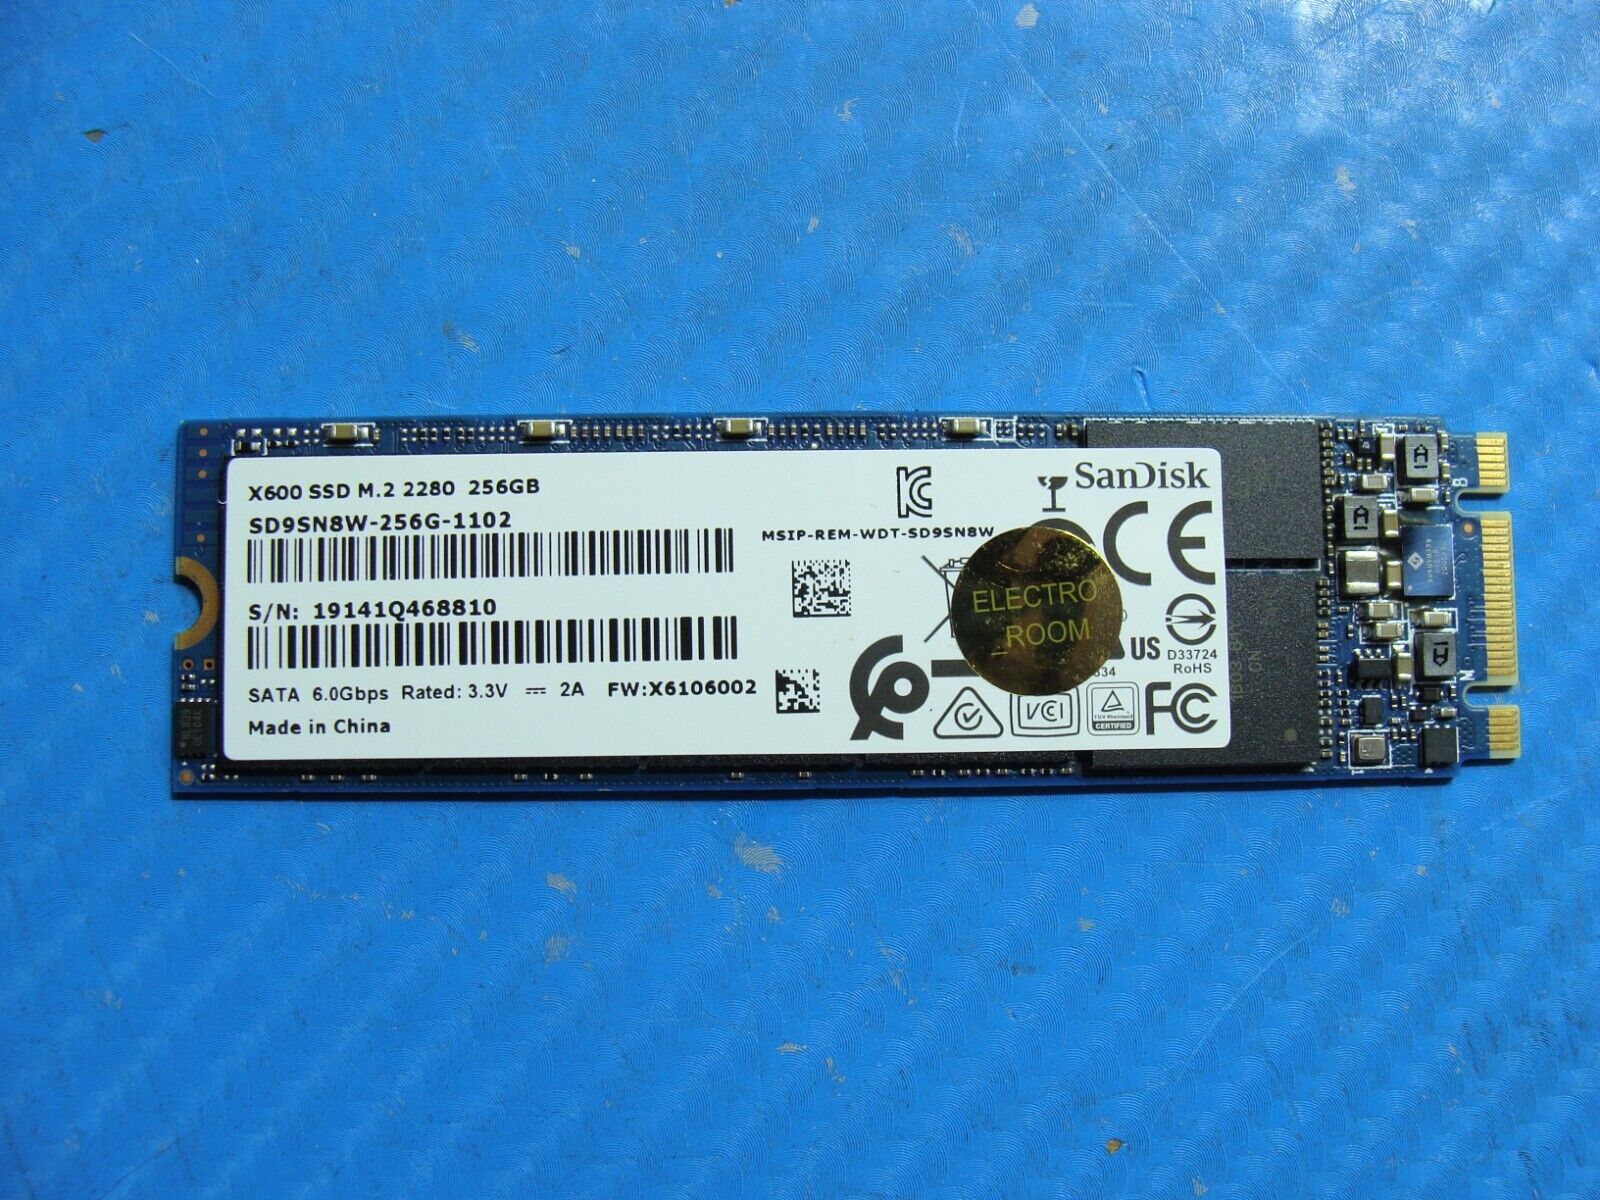 Asus S15 S530 SanDisk M.2 NVMe 256GB SSD Solid State Drive SD9SN8W-256G-1102